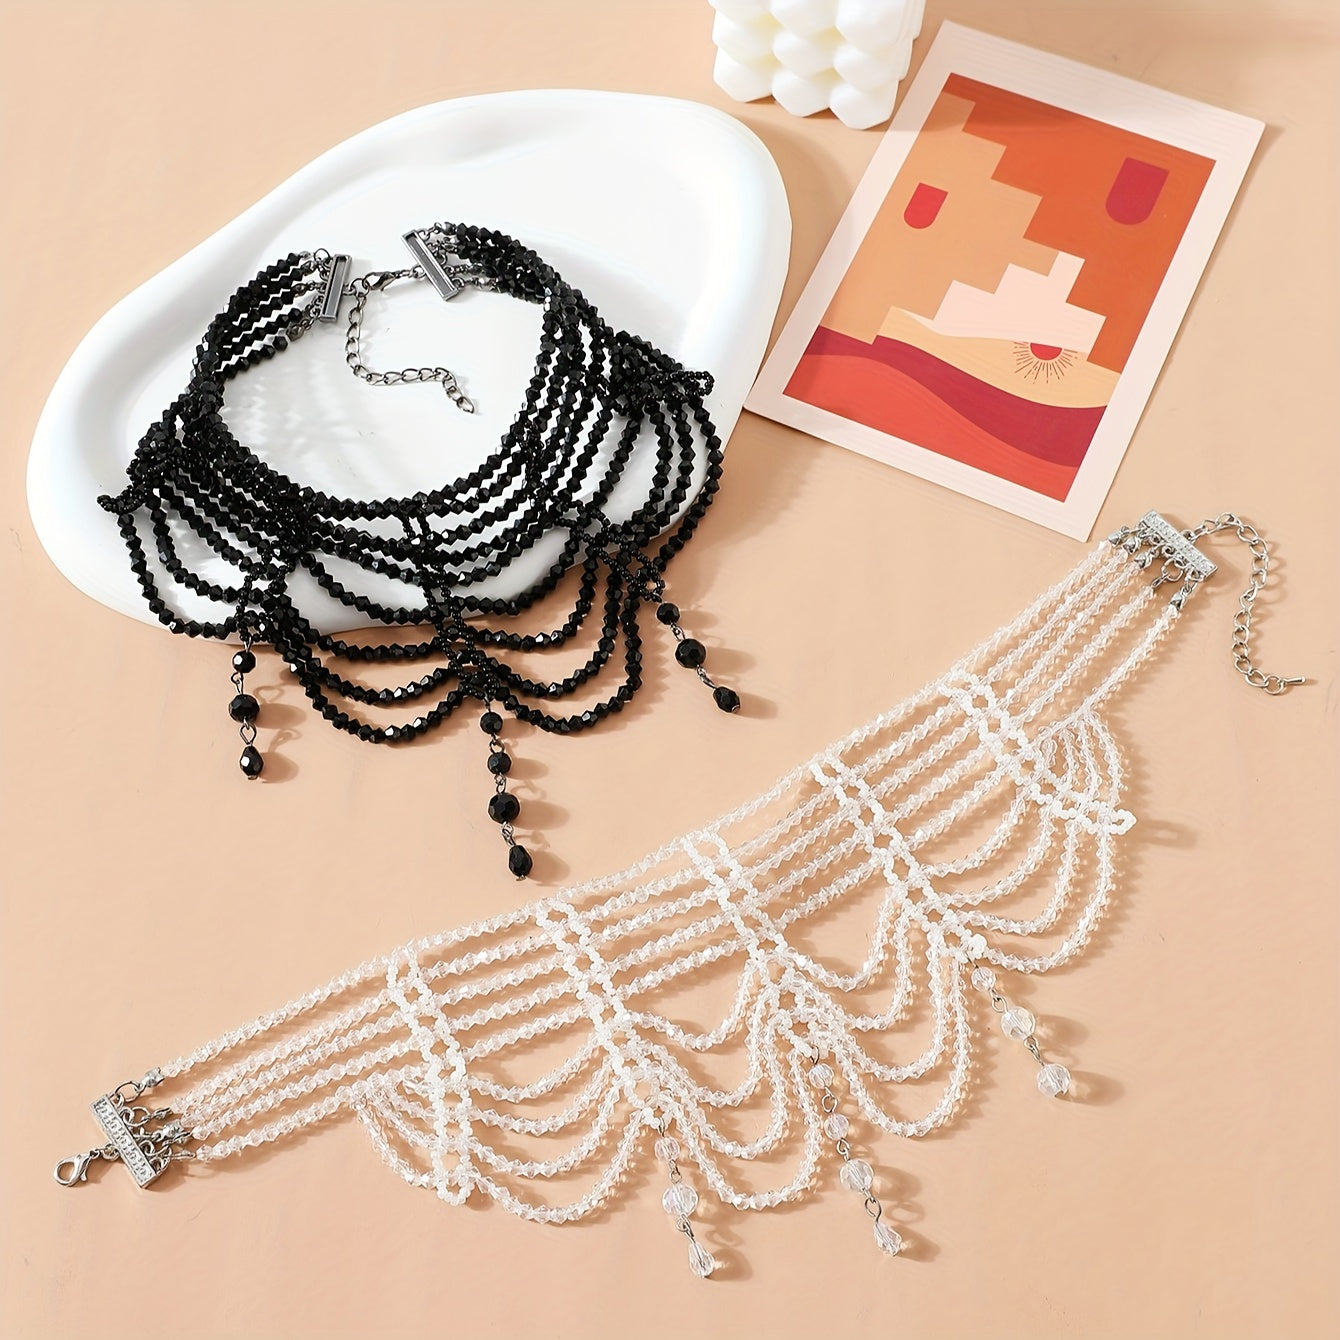 Multilayer Victorian Choker Necklaces | 1pc (Black or White)